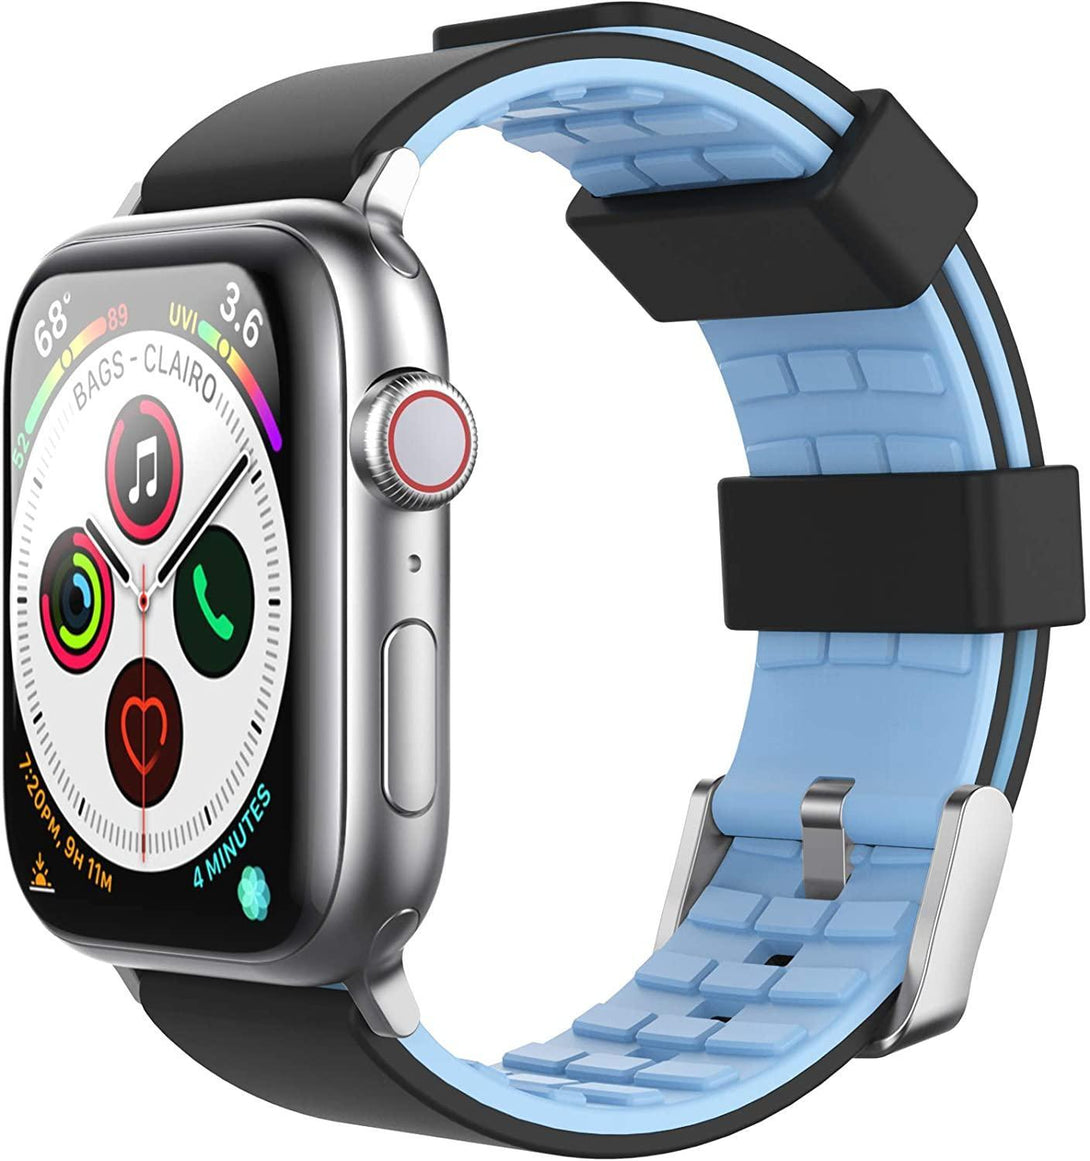 AhaStyle Duotone Silicone Bands for Apple Watch 42/44mm - Black, Sky Blue - Tech Goods